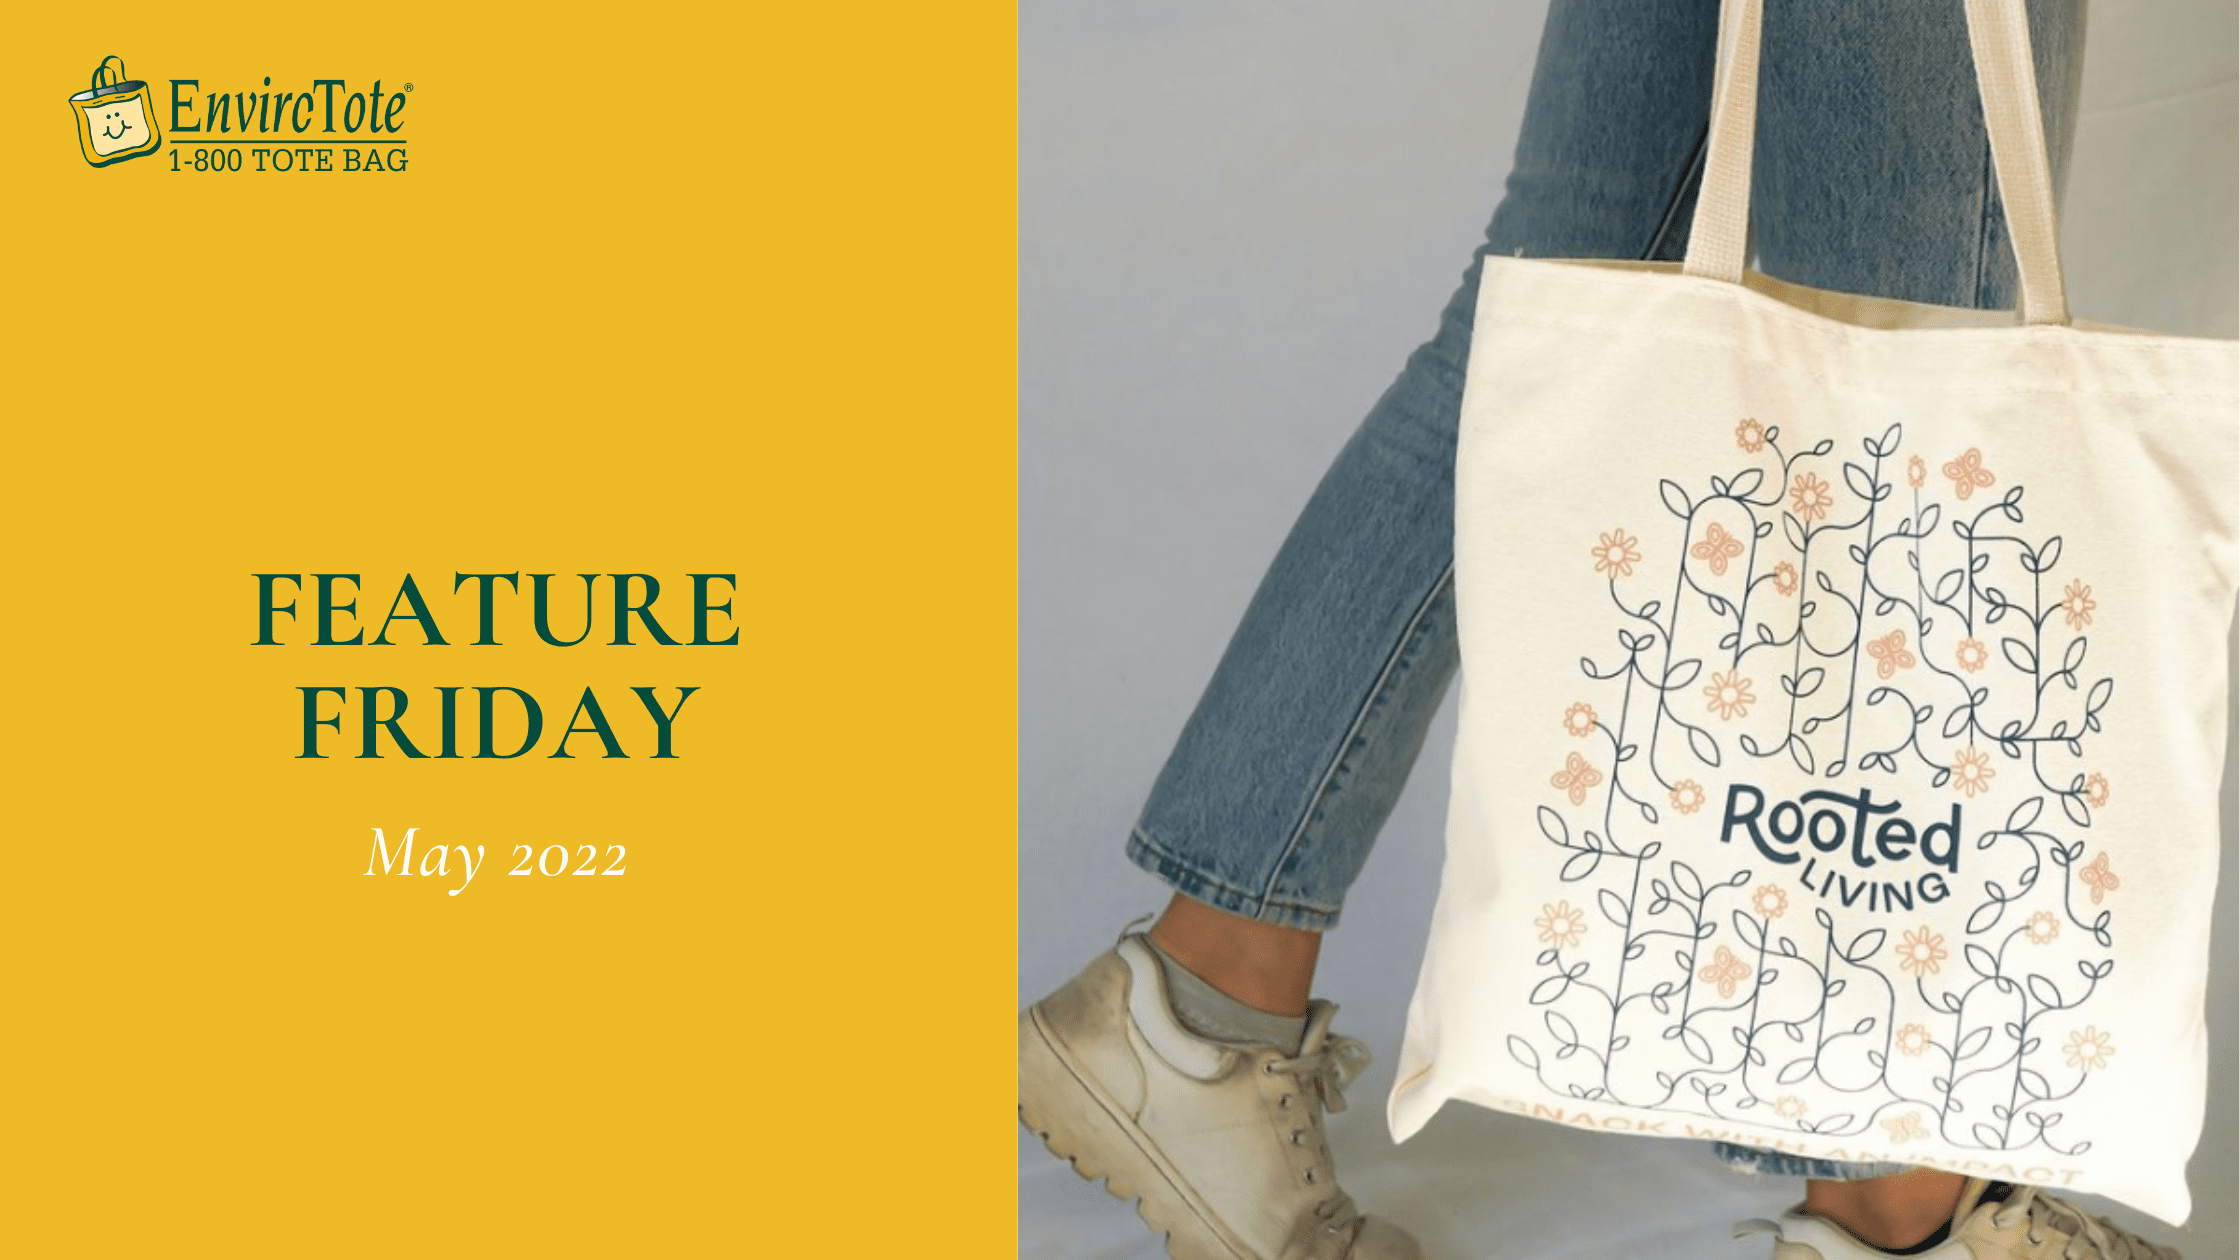 Our Feature Friday for May 2022 highlights USA based businesses and the tote bags that Enviro-Tote® has created for them! Read more to support their causes!